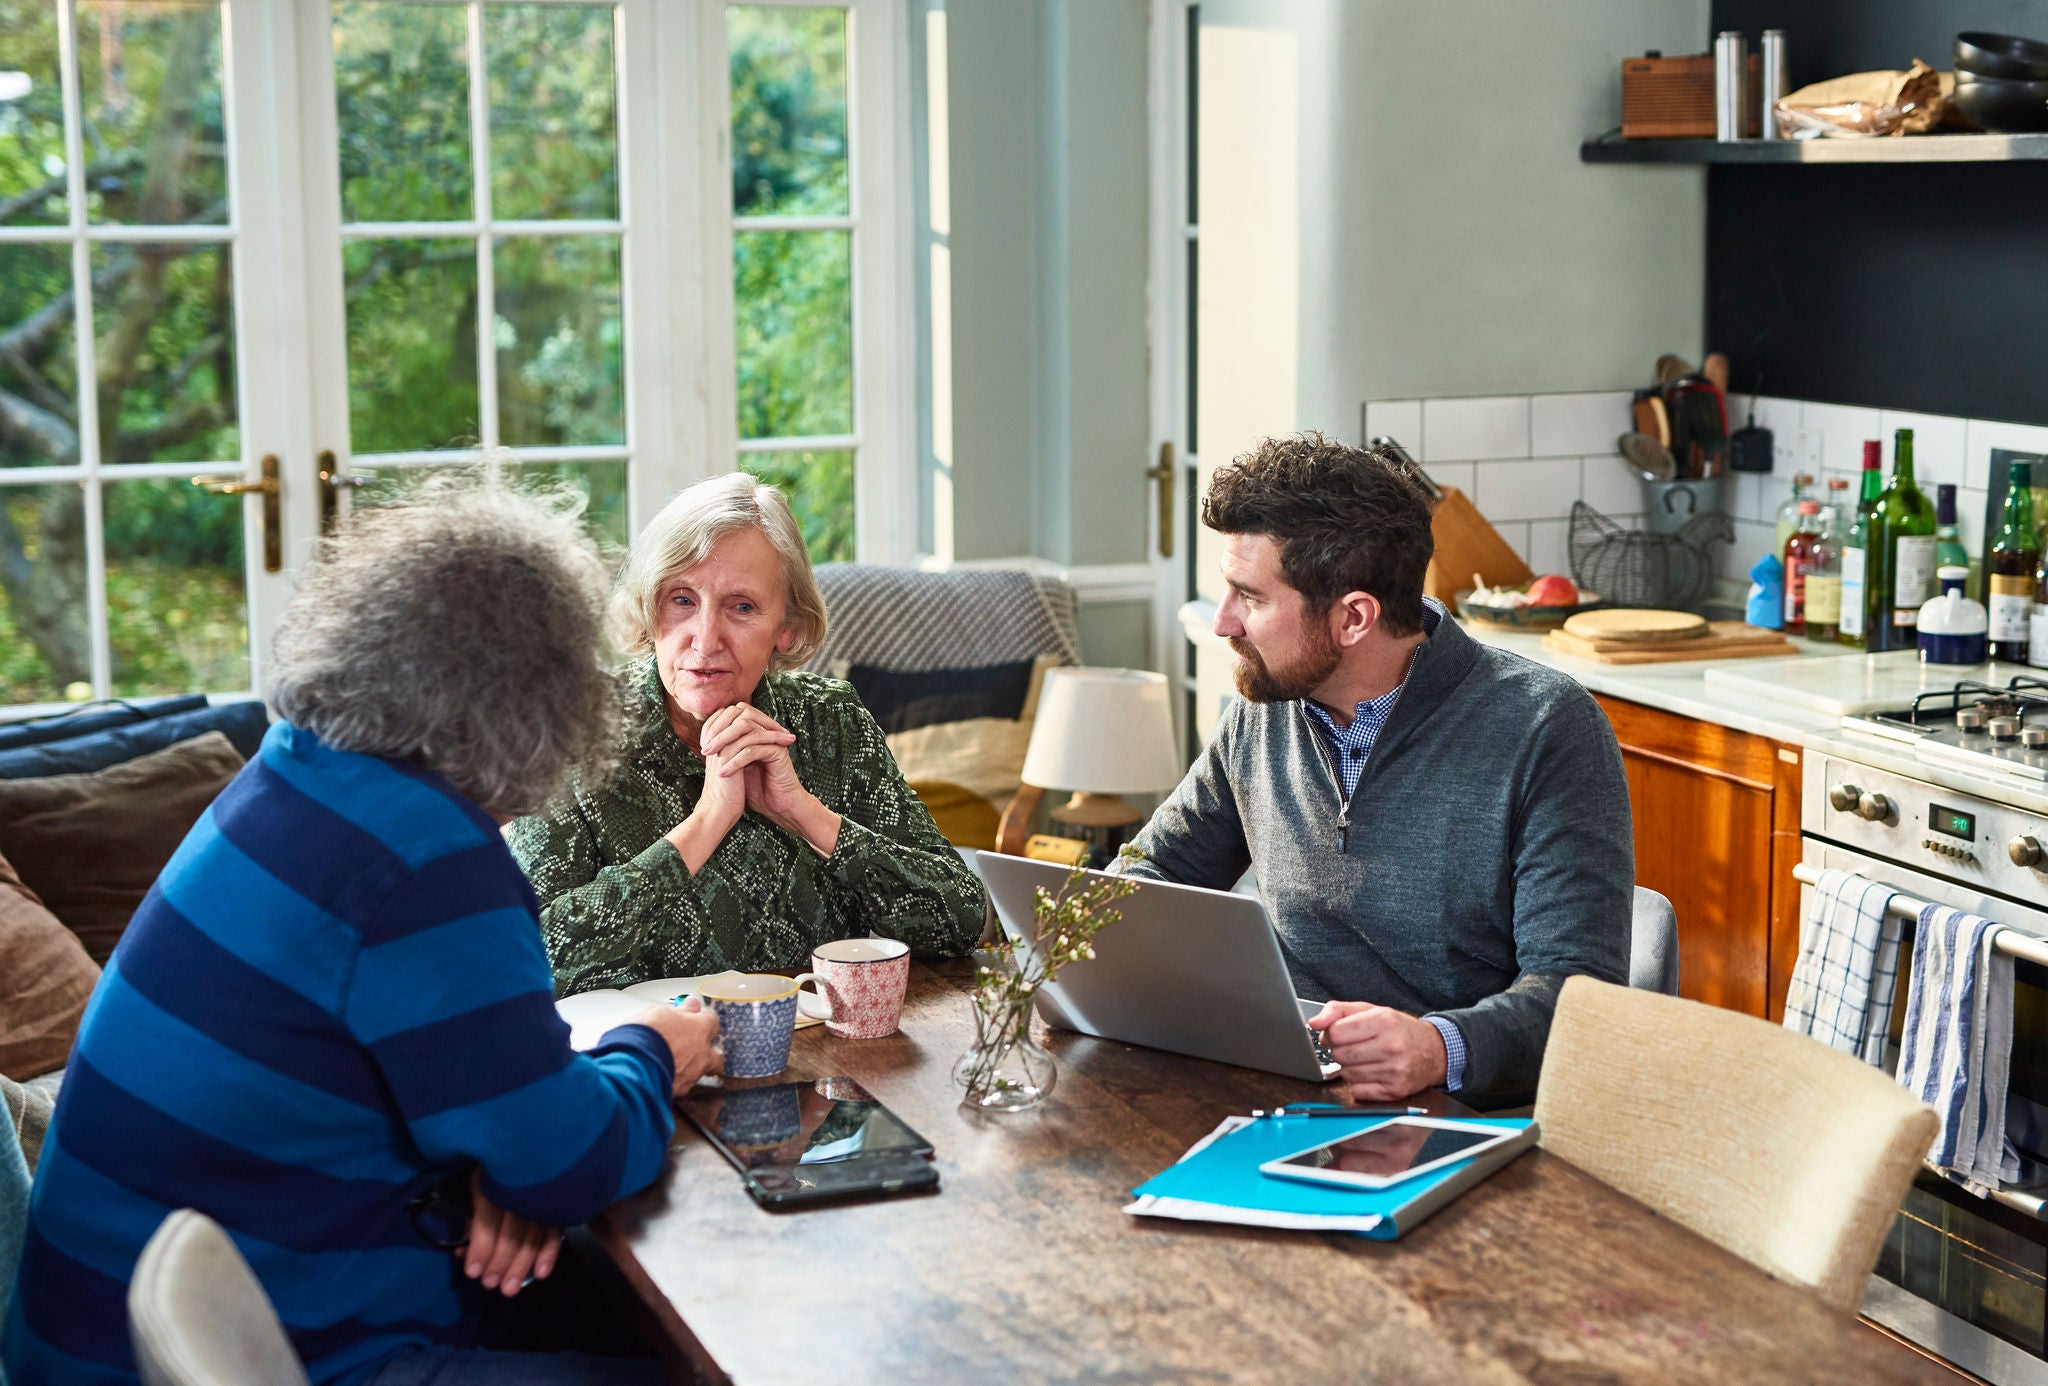 Financial advisor sitting at dining table with senior man and woman discussing financial plans